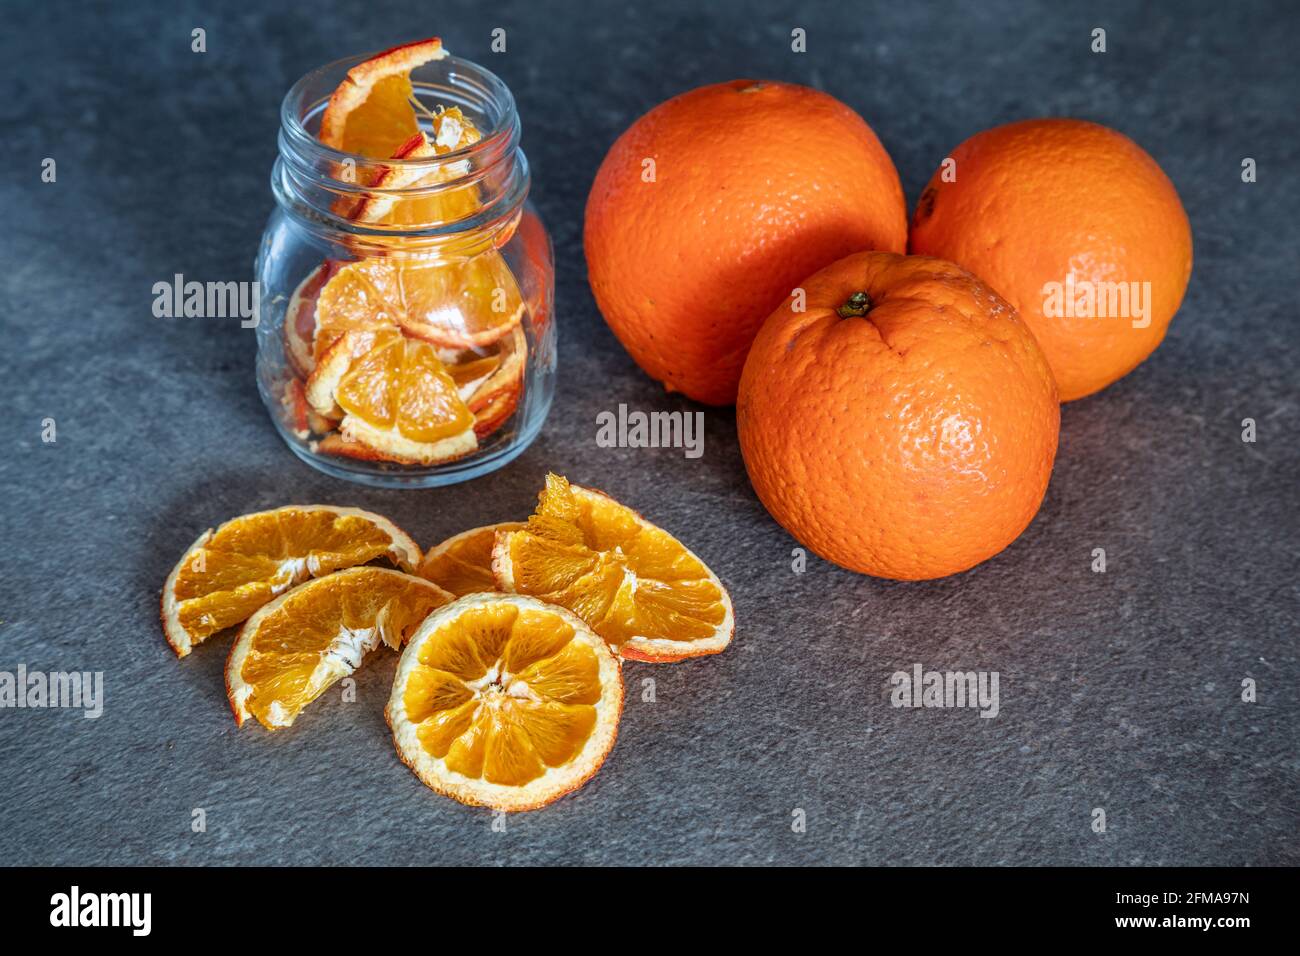 fresh fruit oranges and orange slices dehydrated and stored in glass containers, homemade preparations, Stock Photo